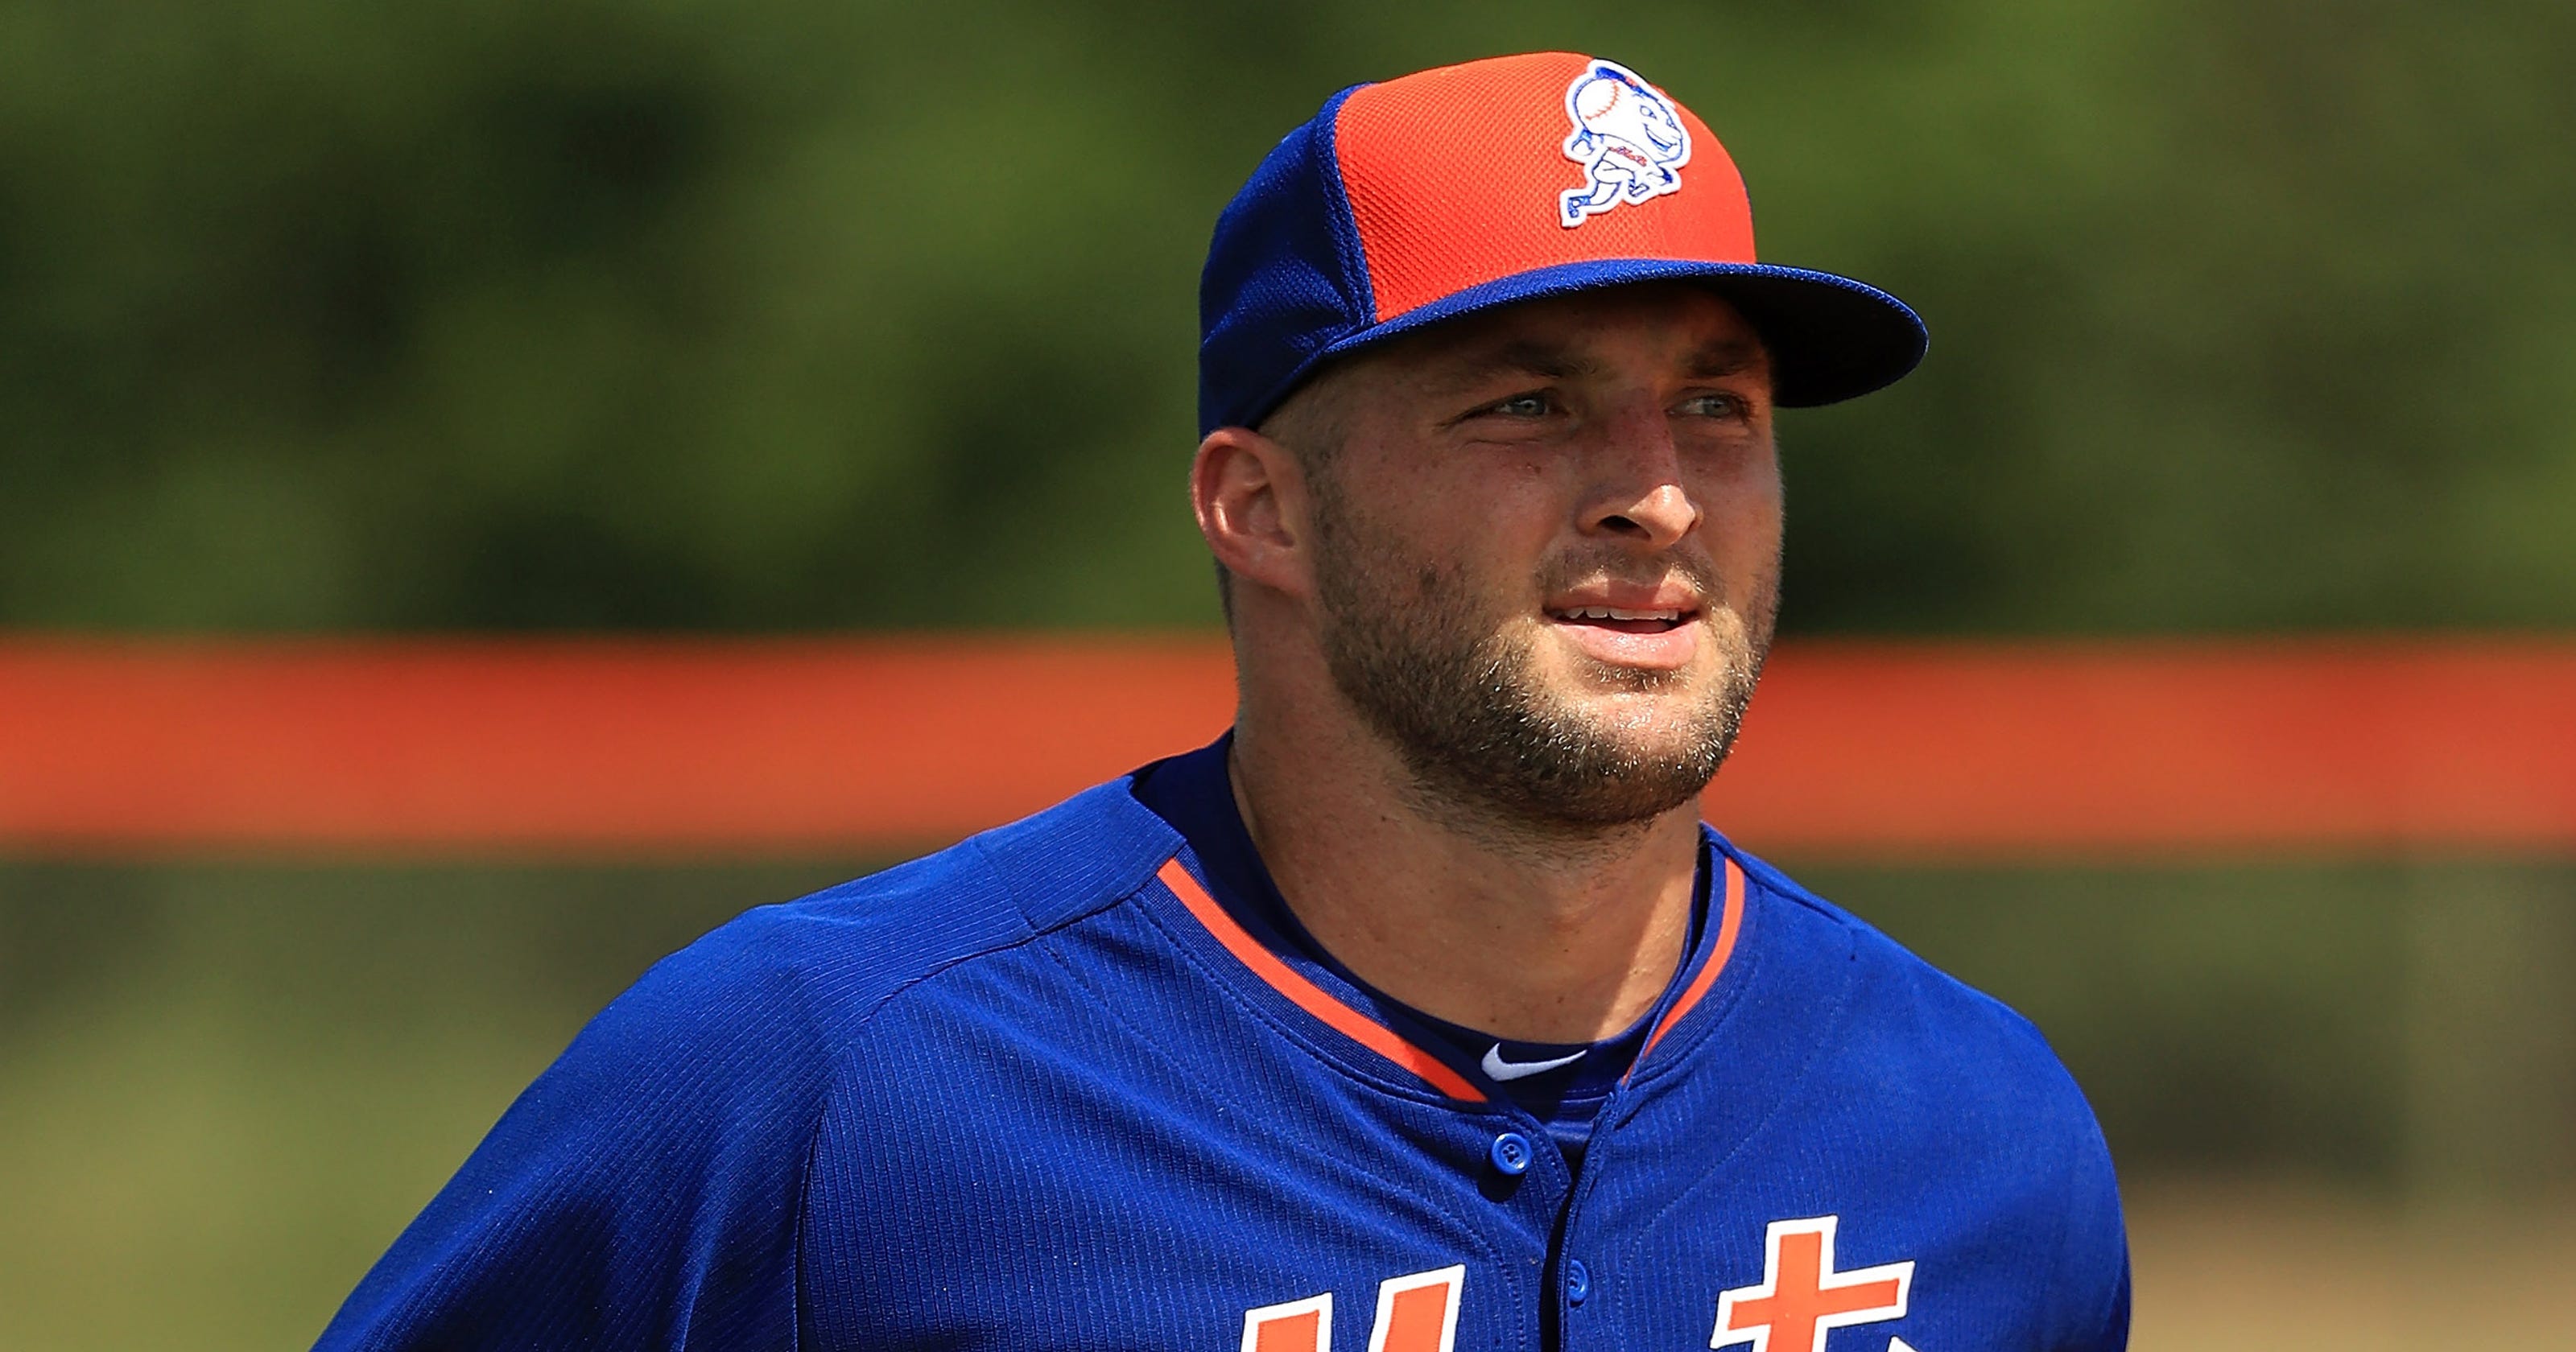 Tim Tebow begins Mets career amid throng of fans, media3200 x 1680